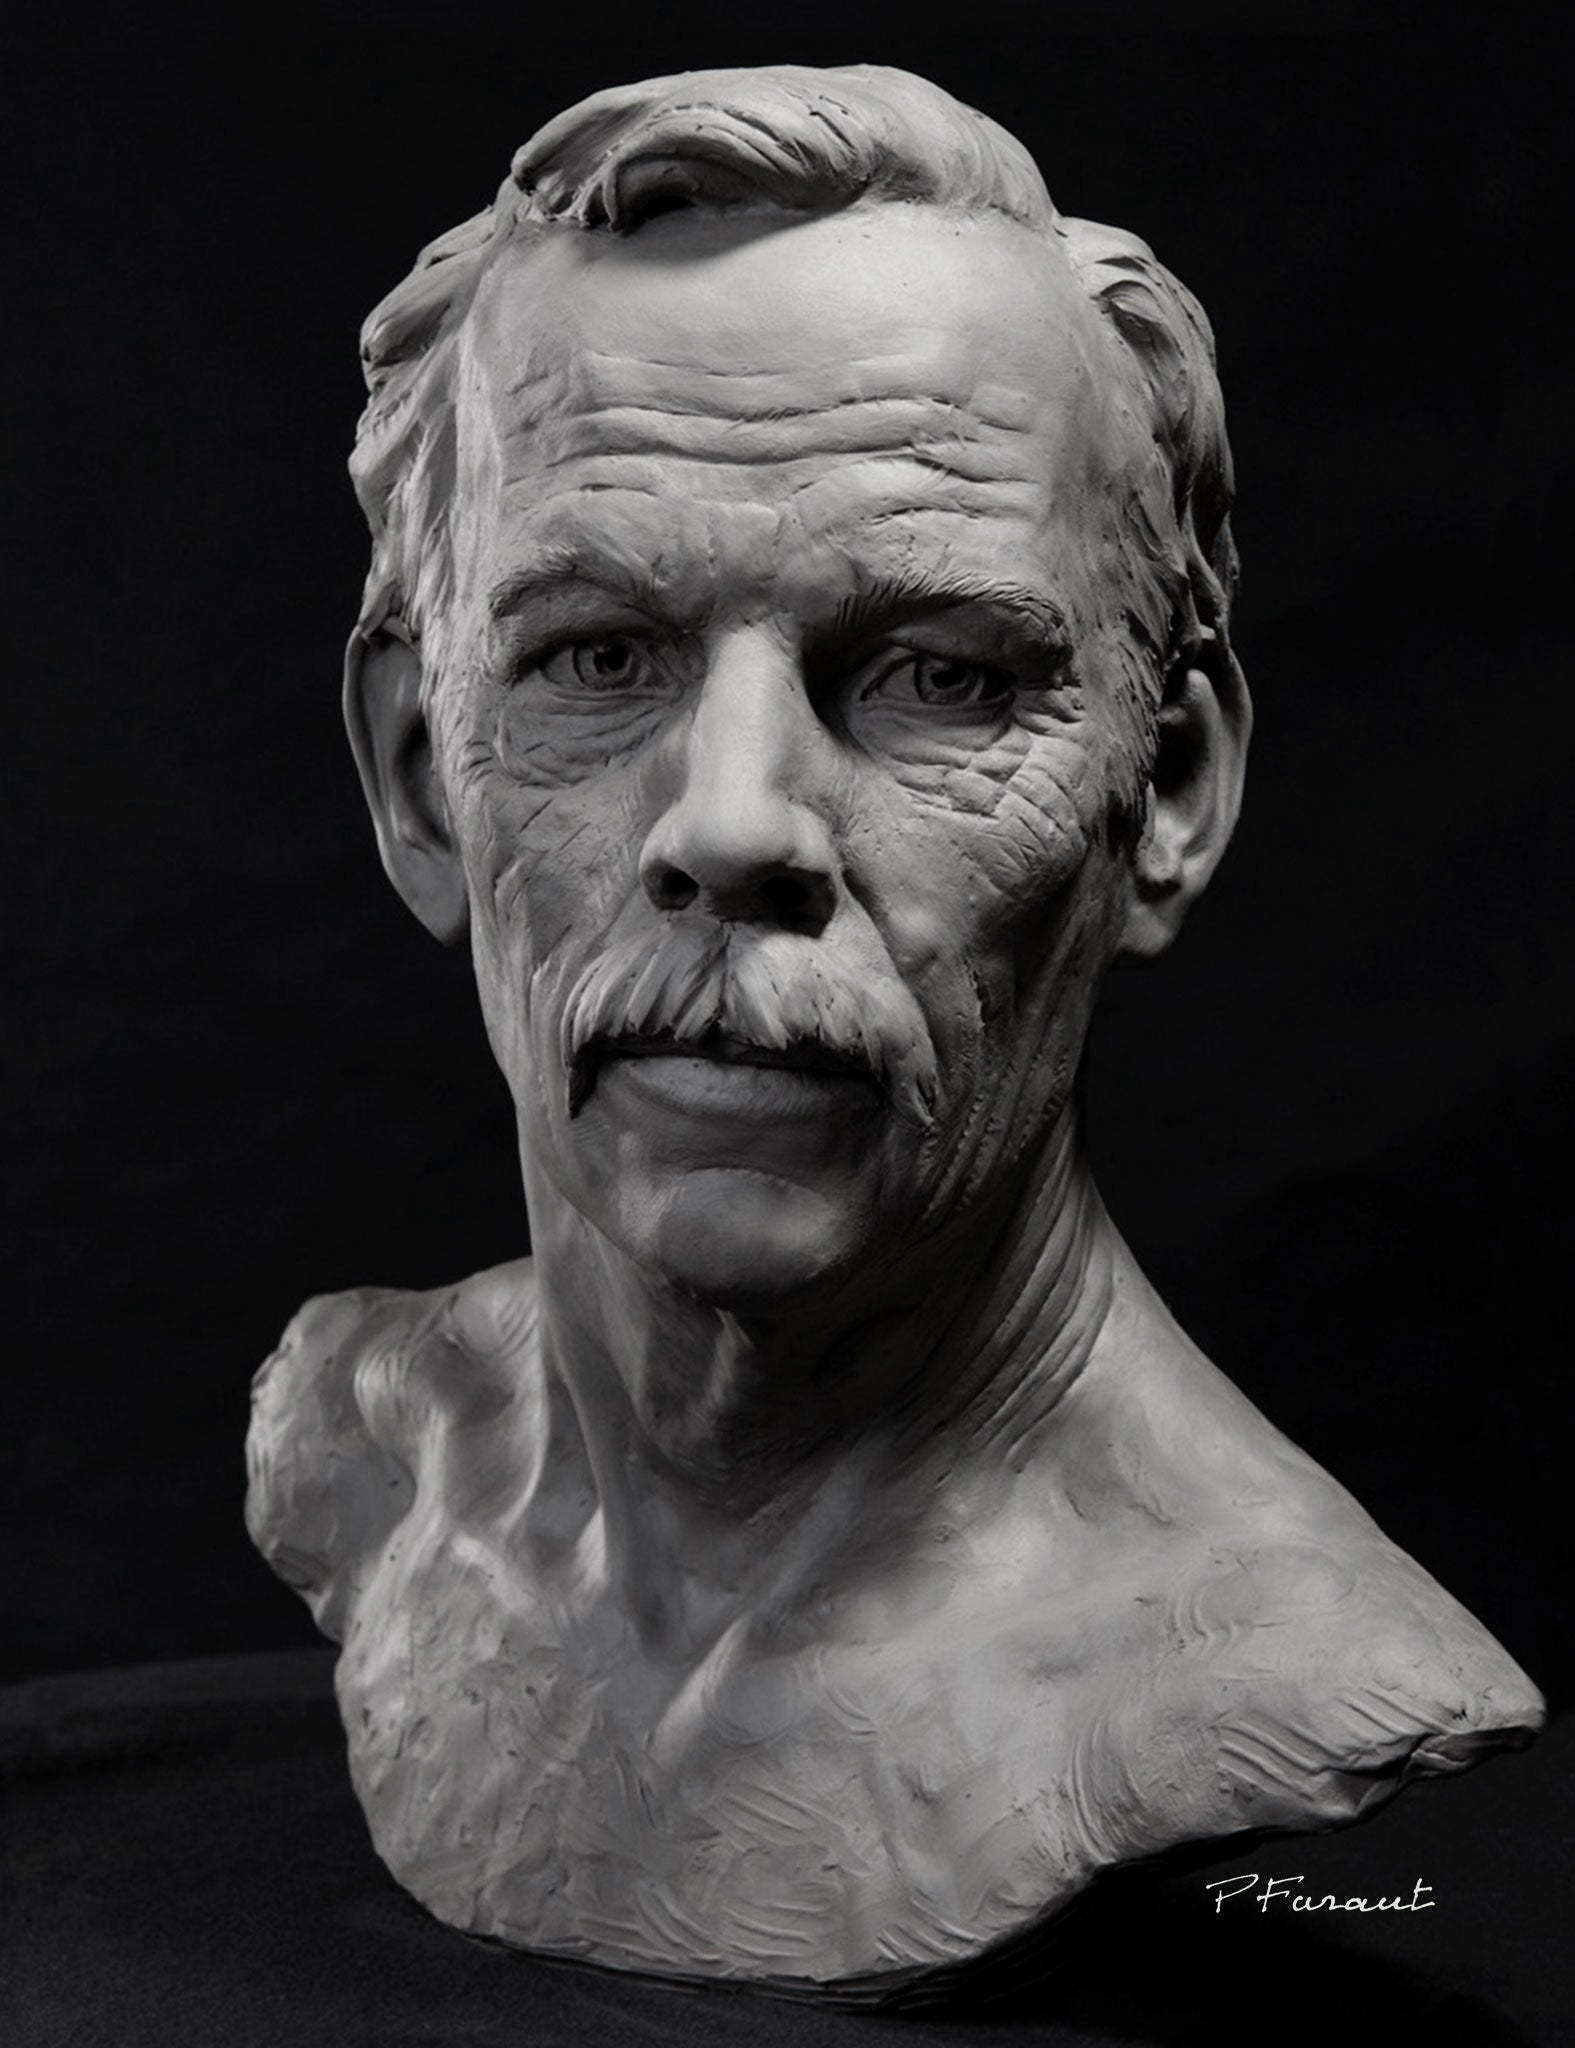 Portait bust of middle-aged man Mister by Philippe Faraut